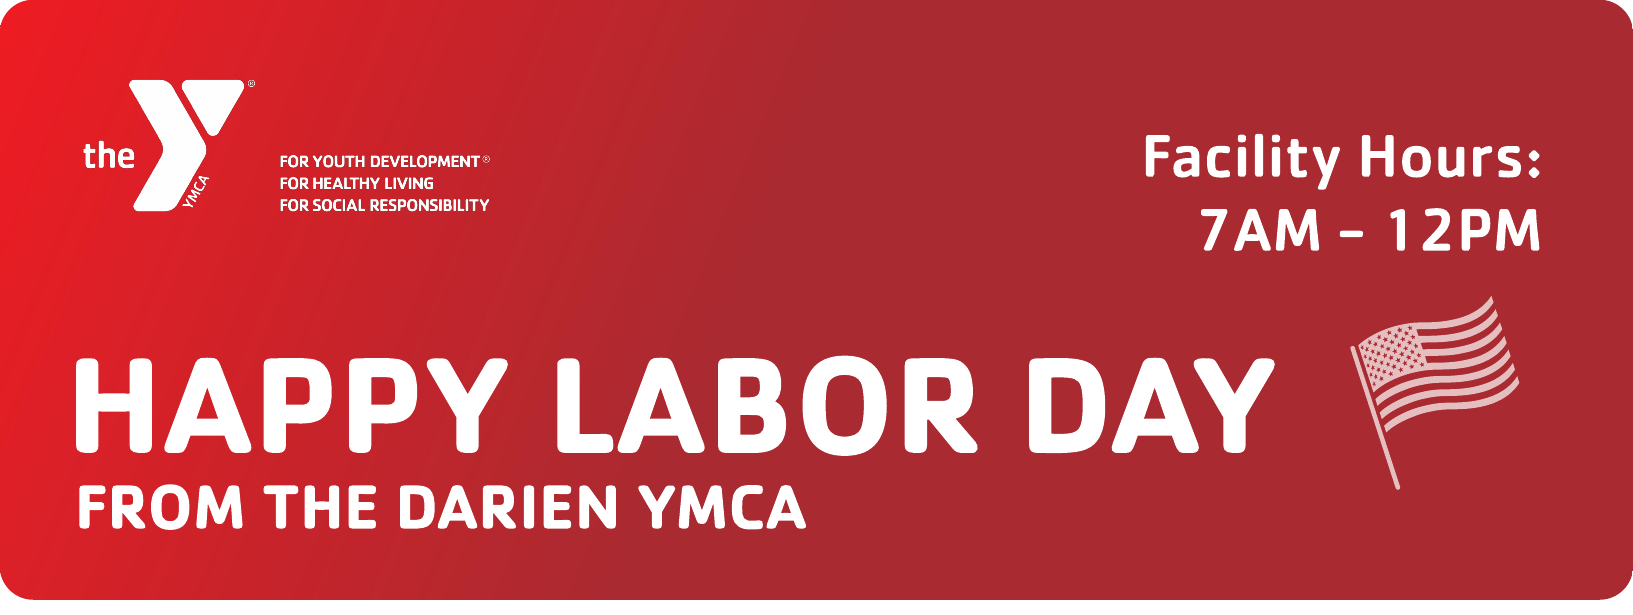 Darien YMCA Labor Day Hours Are 7am - 12PM